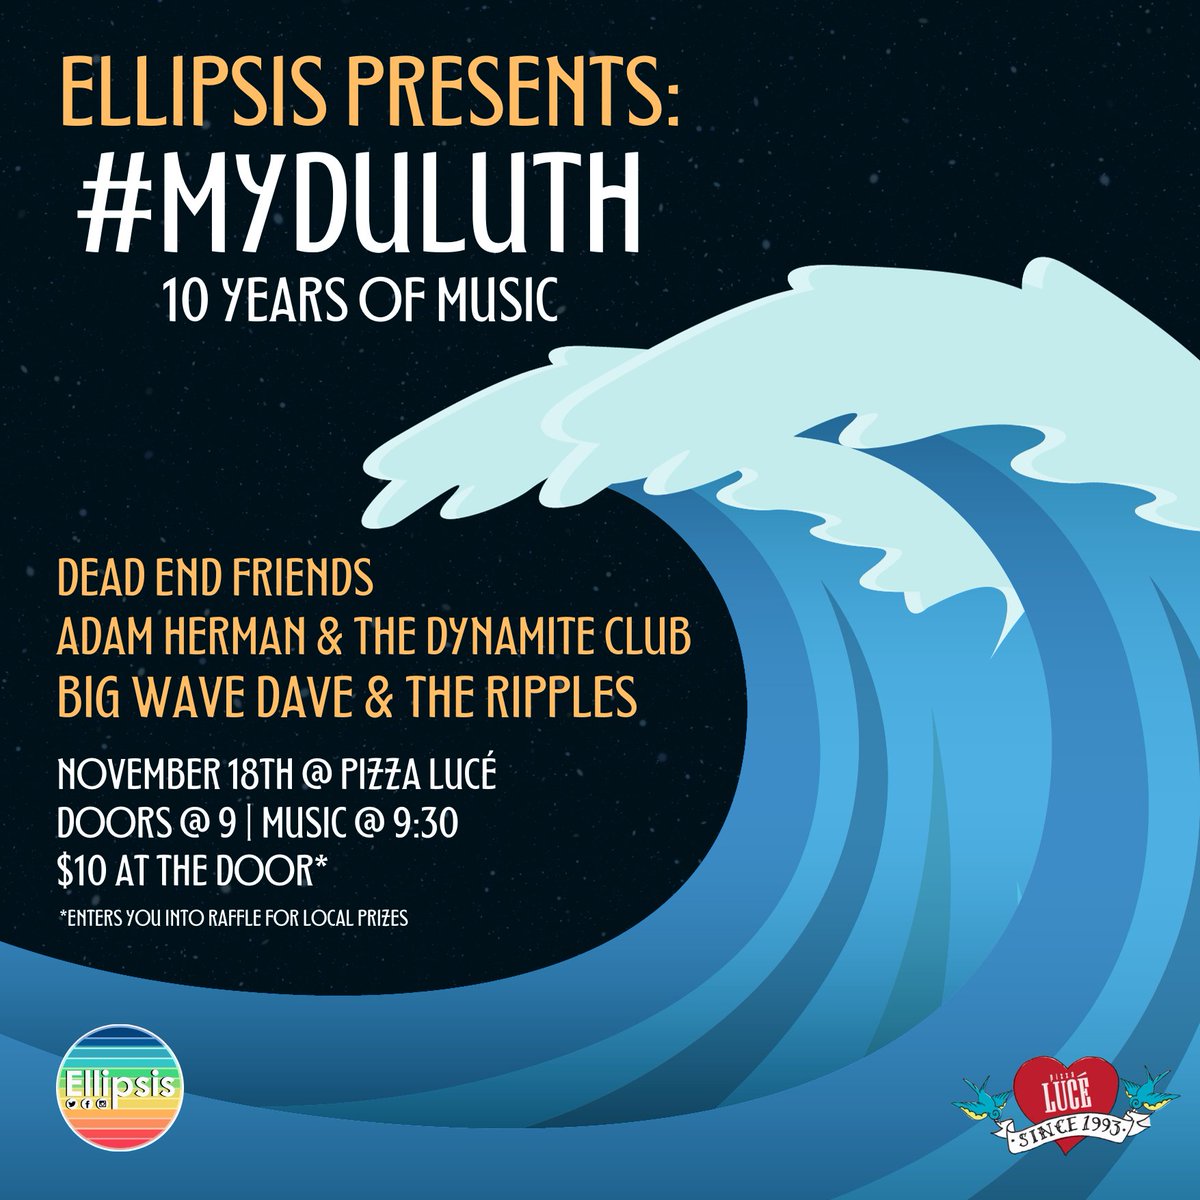 Join me in celebrating 10 Years of Ellipsis! November 18th at Pizza Luce Doors @ 9 | Music @ 9:30 $10 ← Gets you in the door AND entered in to win local prizes! Dead End Friends ← Who played my FIRST-EVER SHOW Adam Herman & The Dynamite Club Big Wave Dave & The Ripples